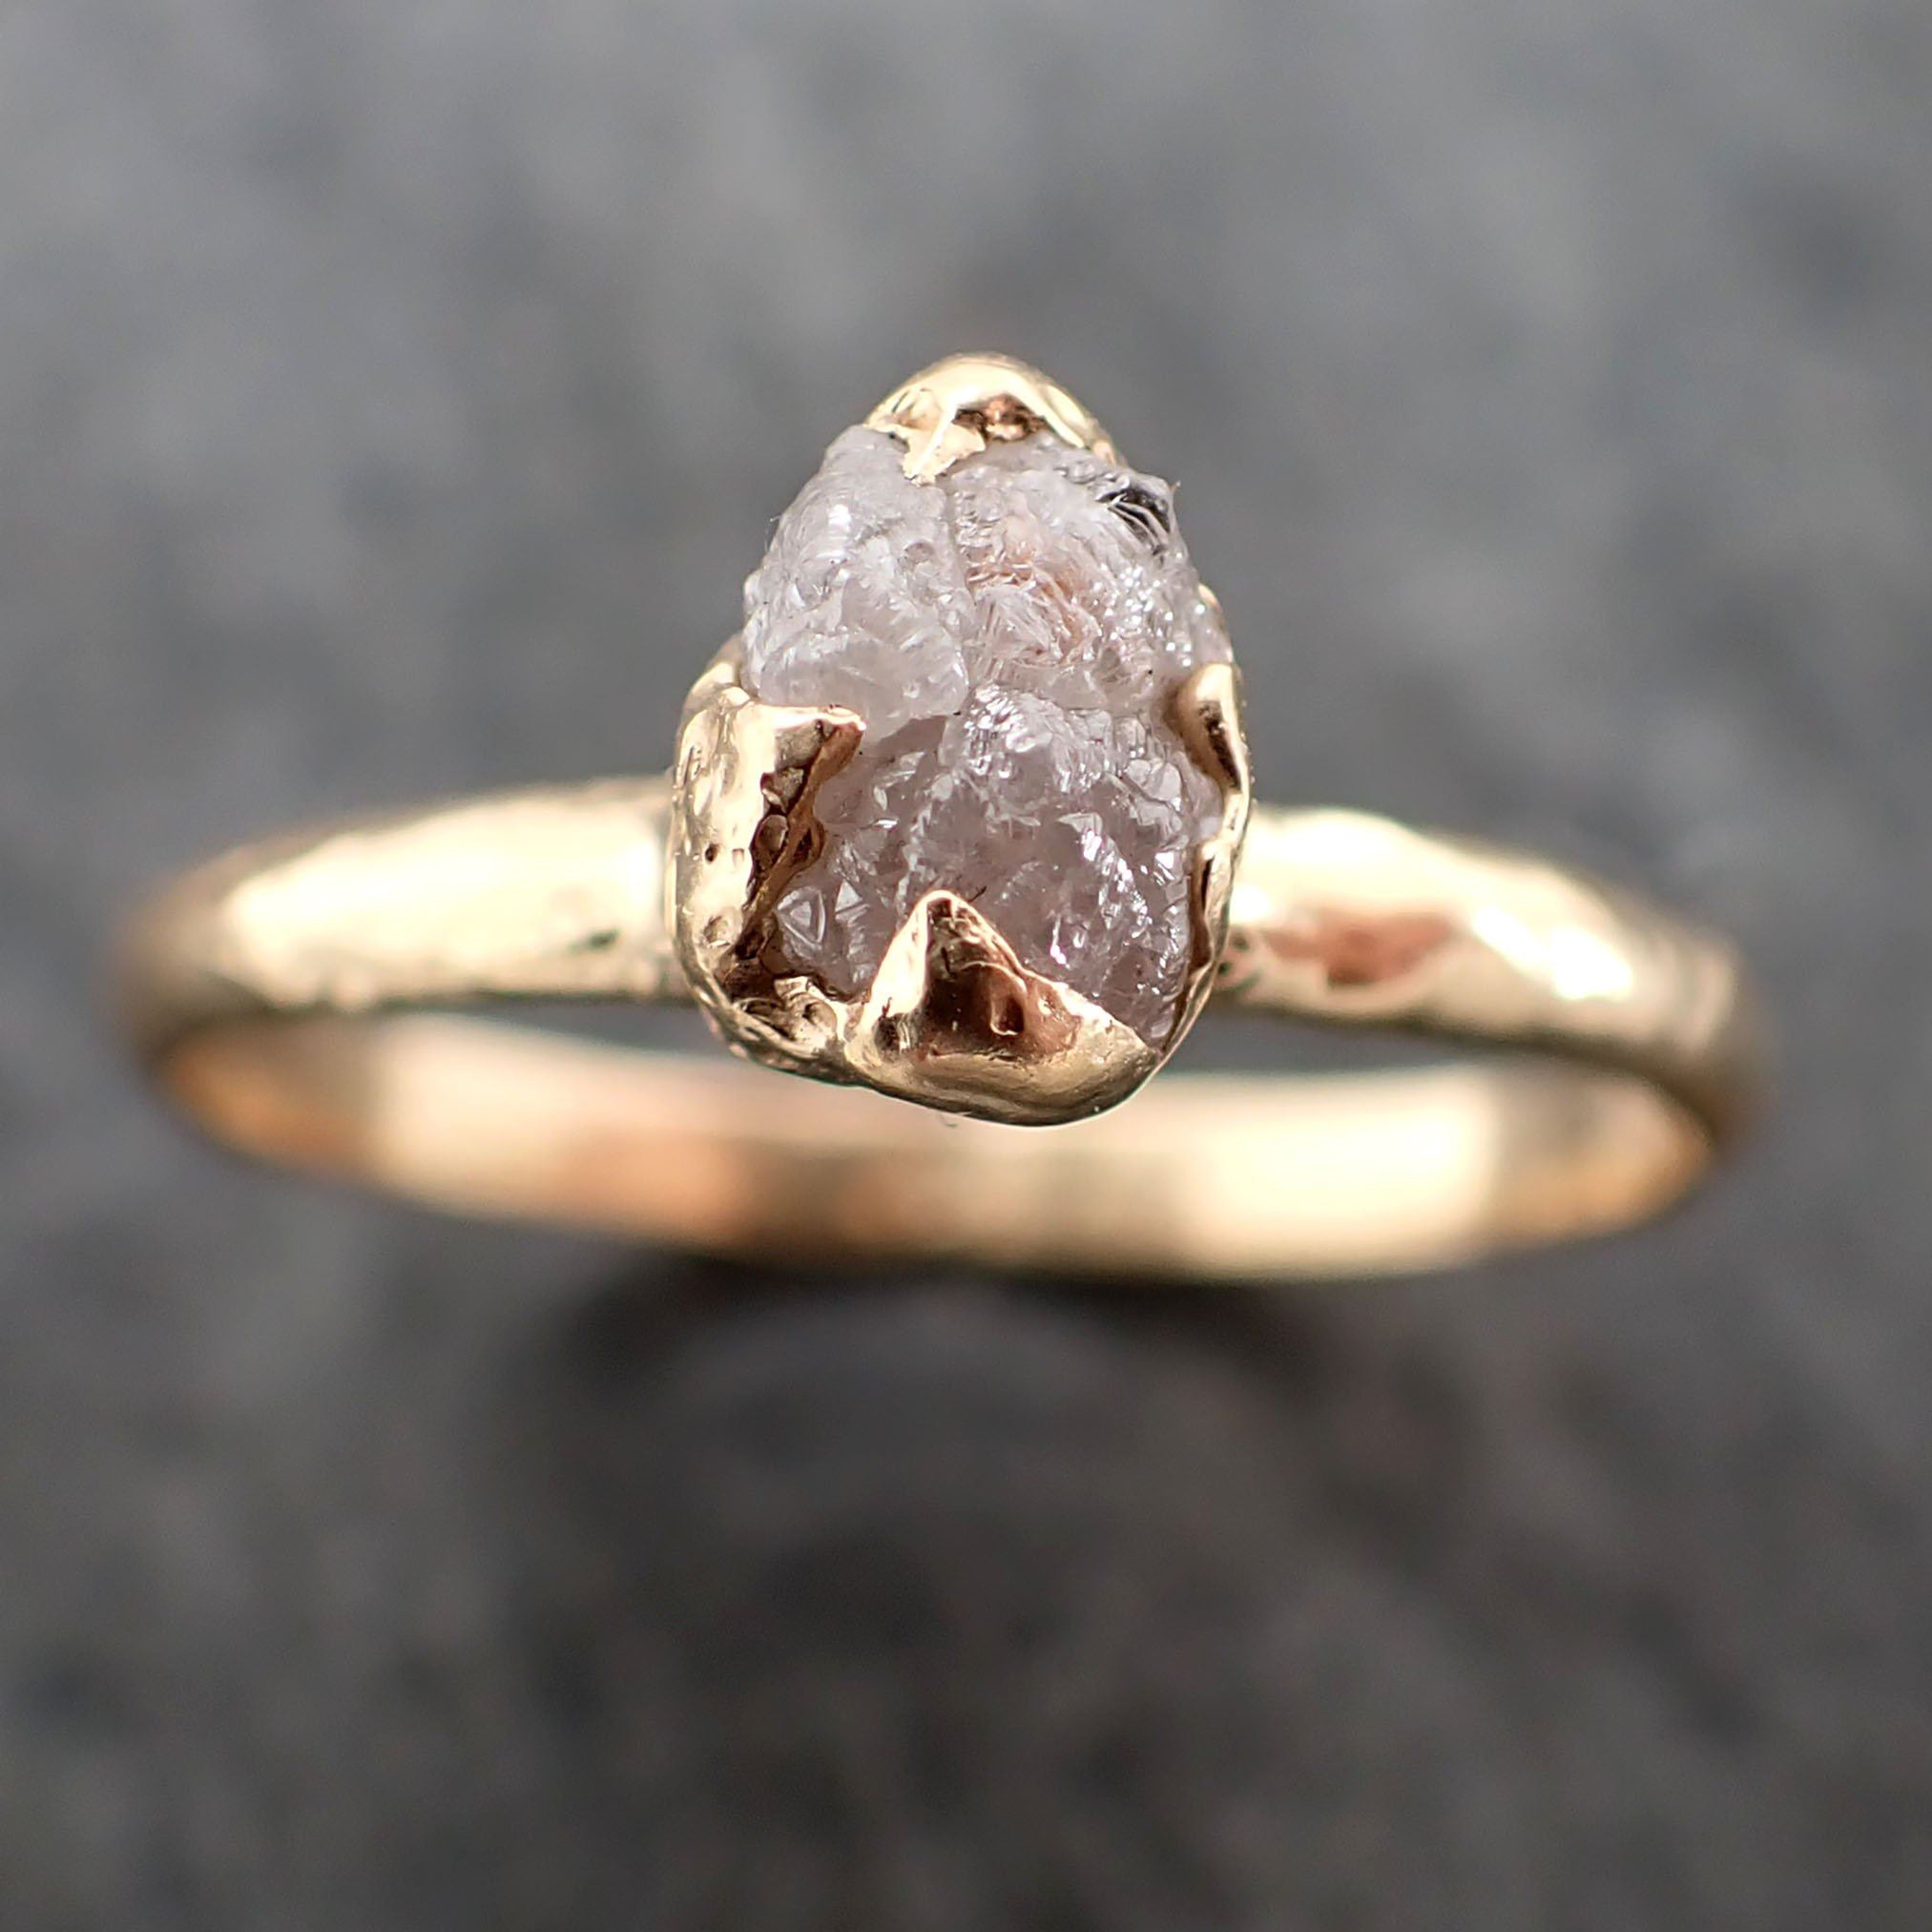 raw diamond engagement ring rough uncut diamond solitaire recycled 14k yellow gold conflict free diamond wedding promise 2167 Alternative Engagement